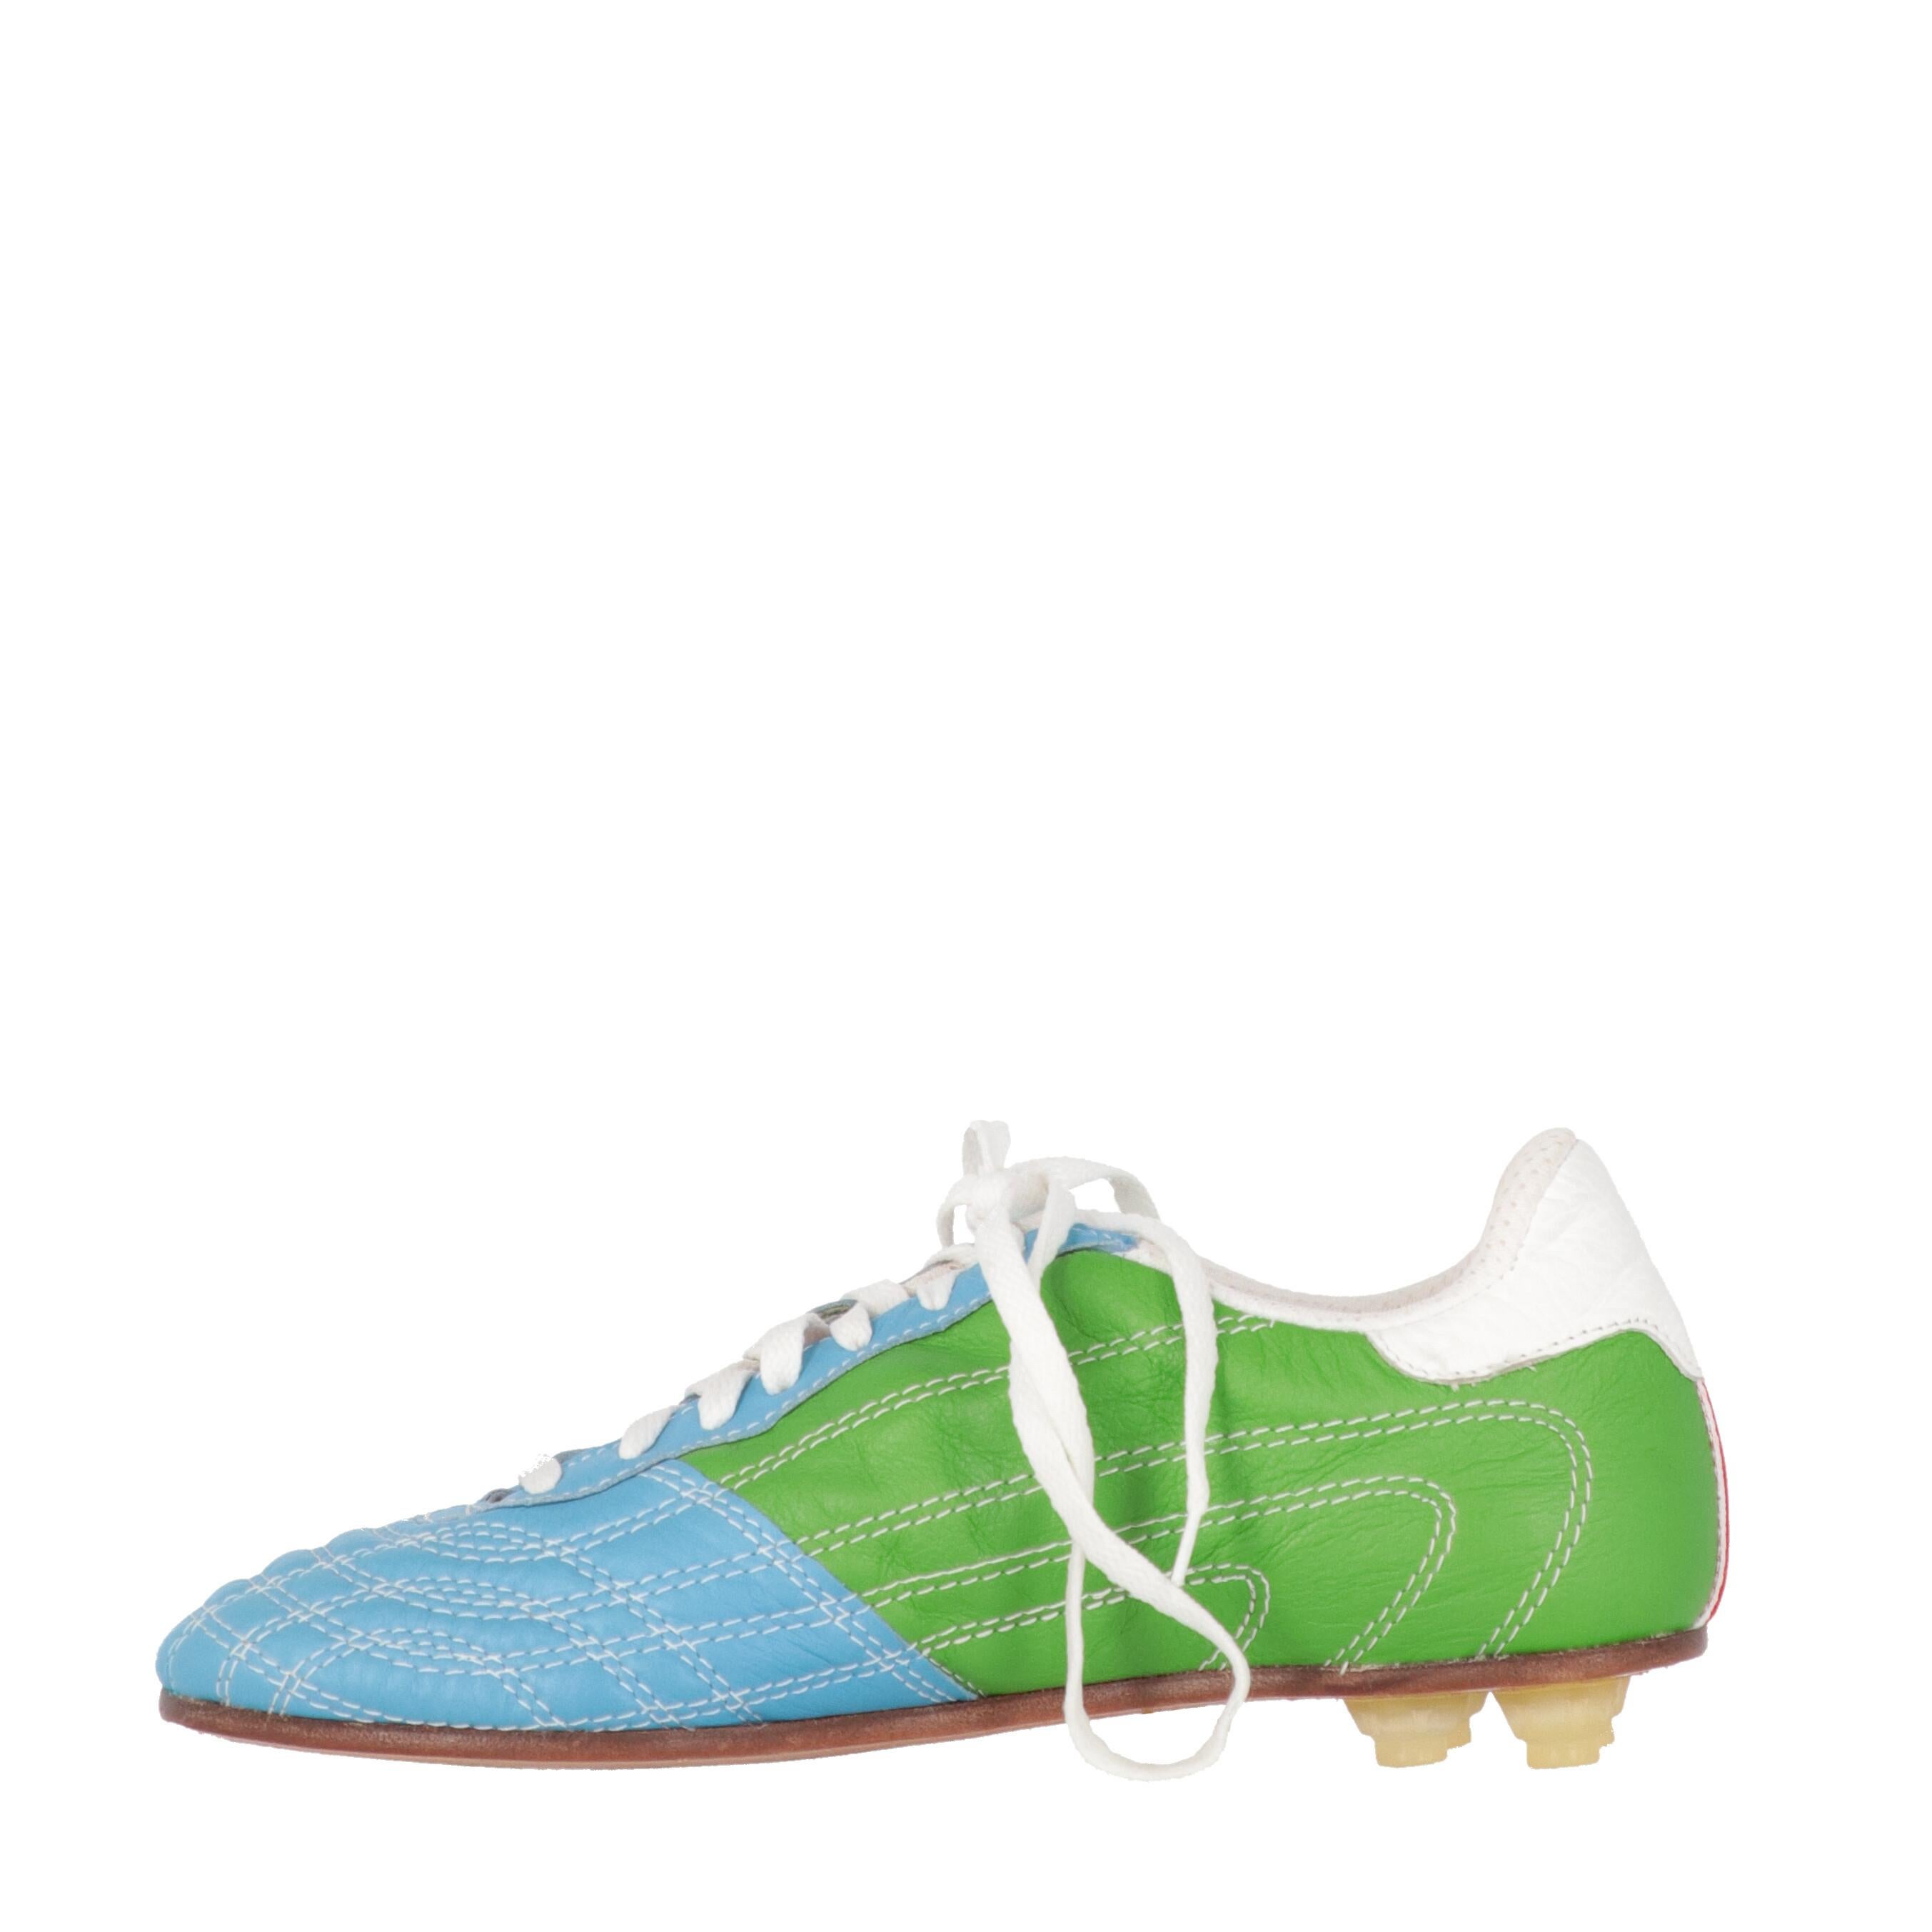 Dirk Bikkembergs green, light blue and white leather shoes. Round toe, side logo and white laces. Sole with removable cleats.

Replacements cleats and cleat key included.
Years: 2010s

Made in Italy

Size: 40 EU

Insole: 26 cm